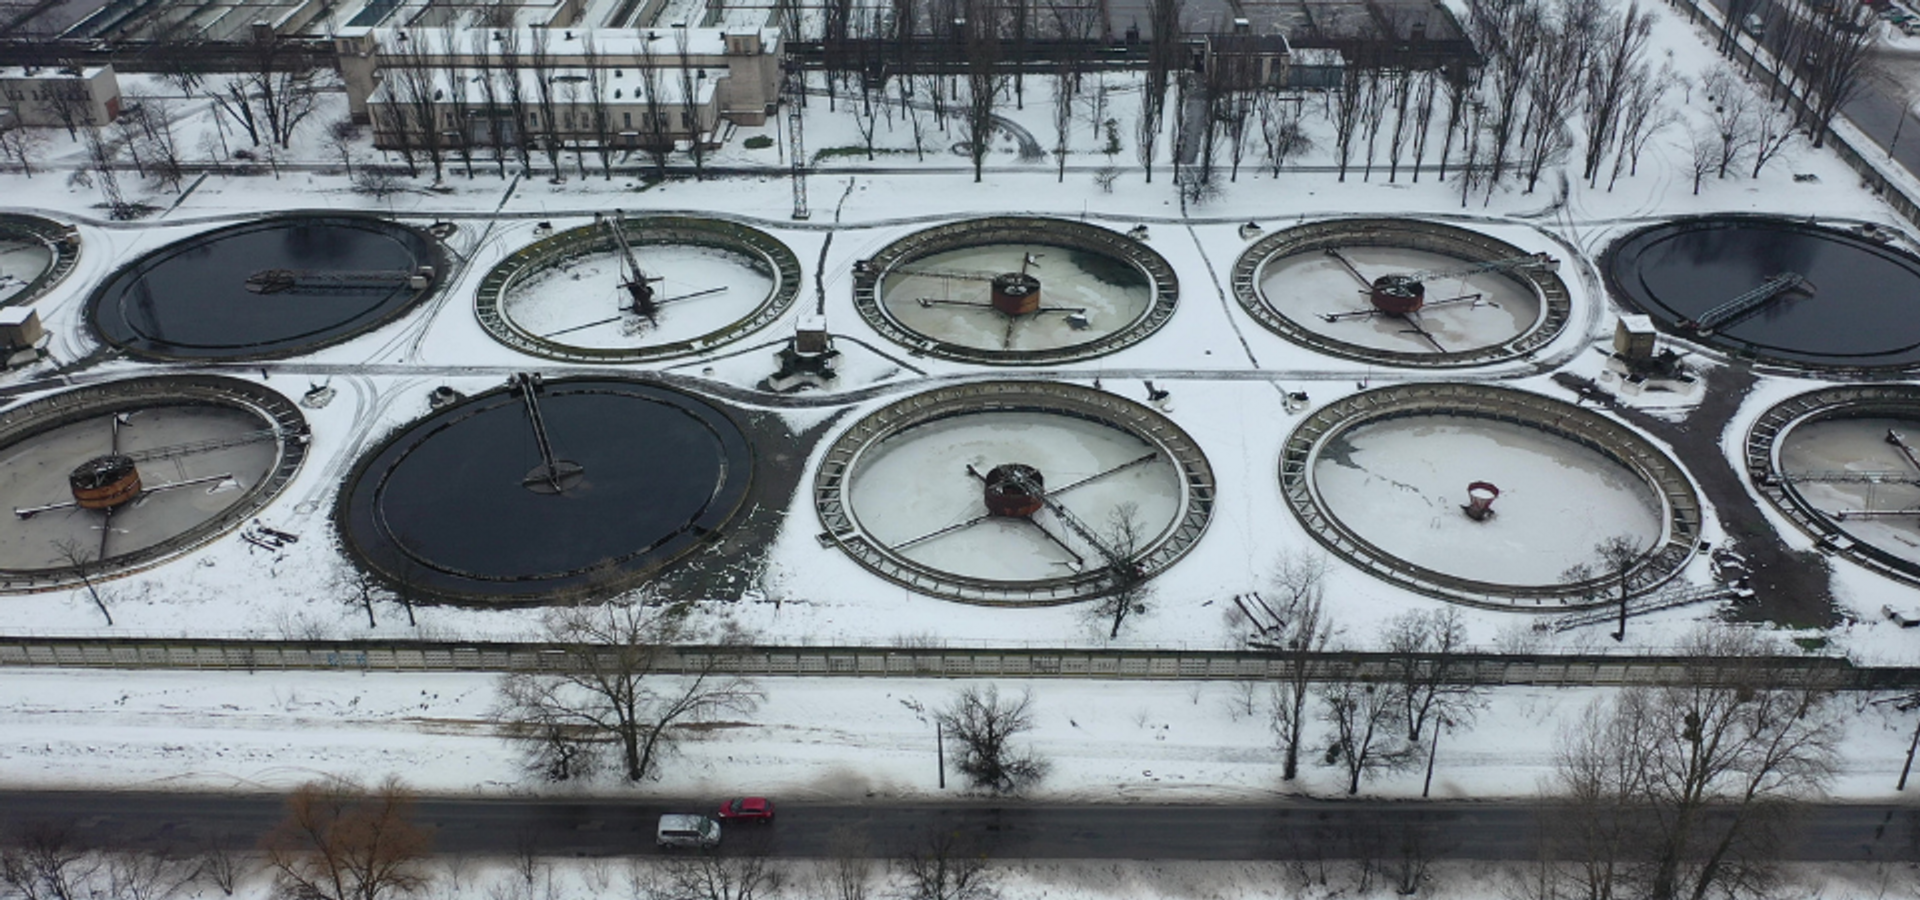 Winterizing Your Wastewater Treatment Plant